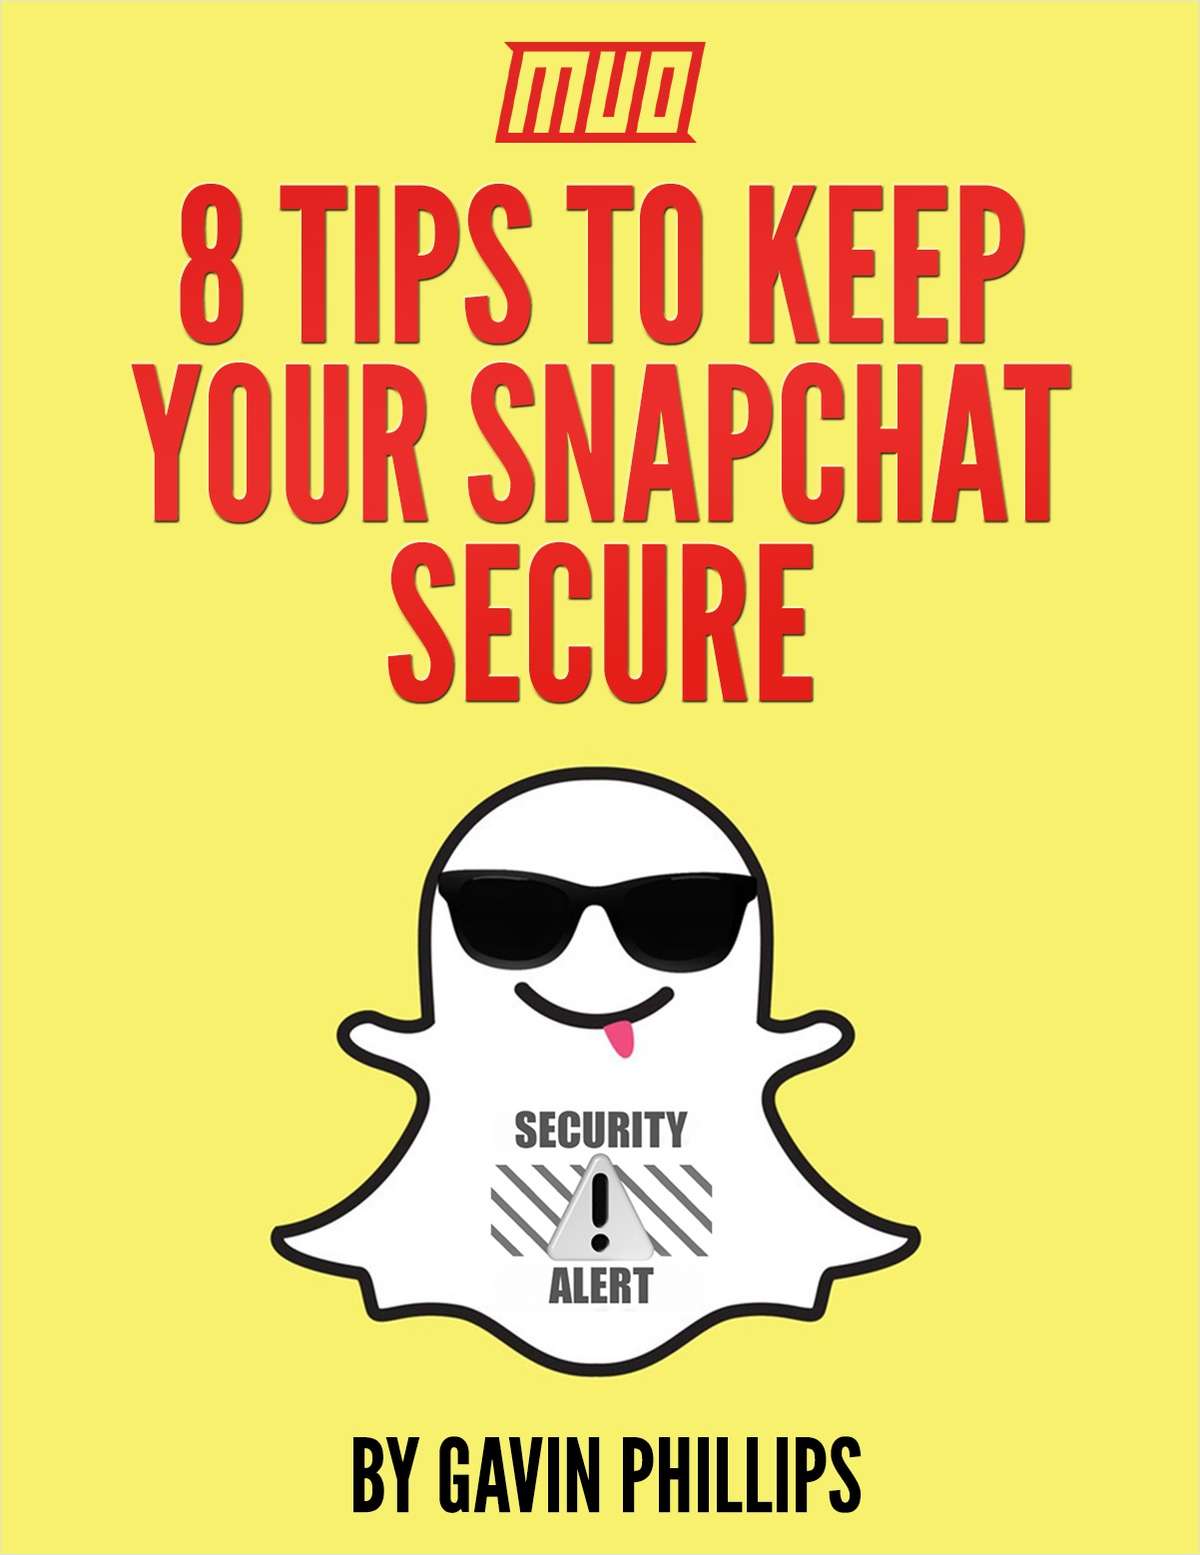 8 Tips to Keep Your Snapchat Secure